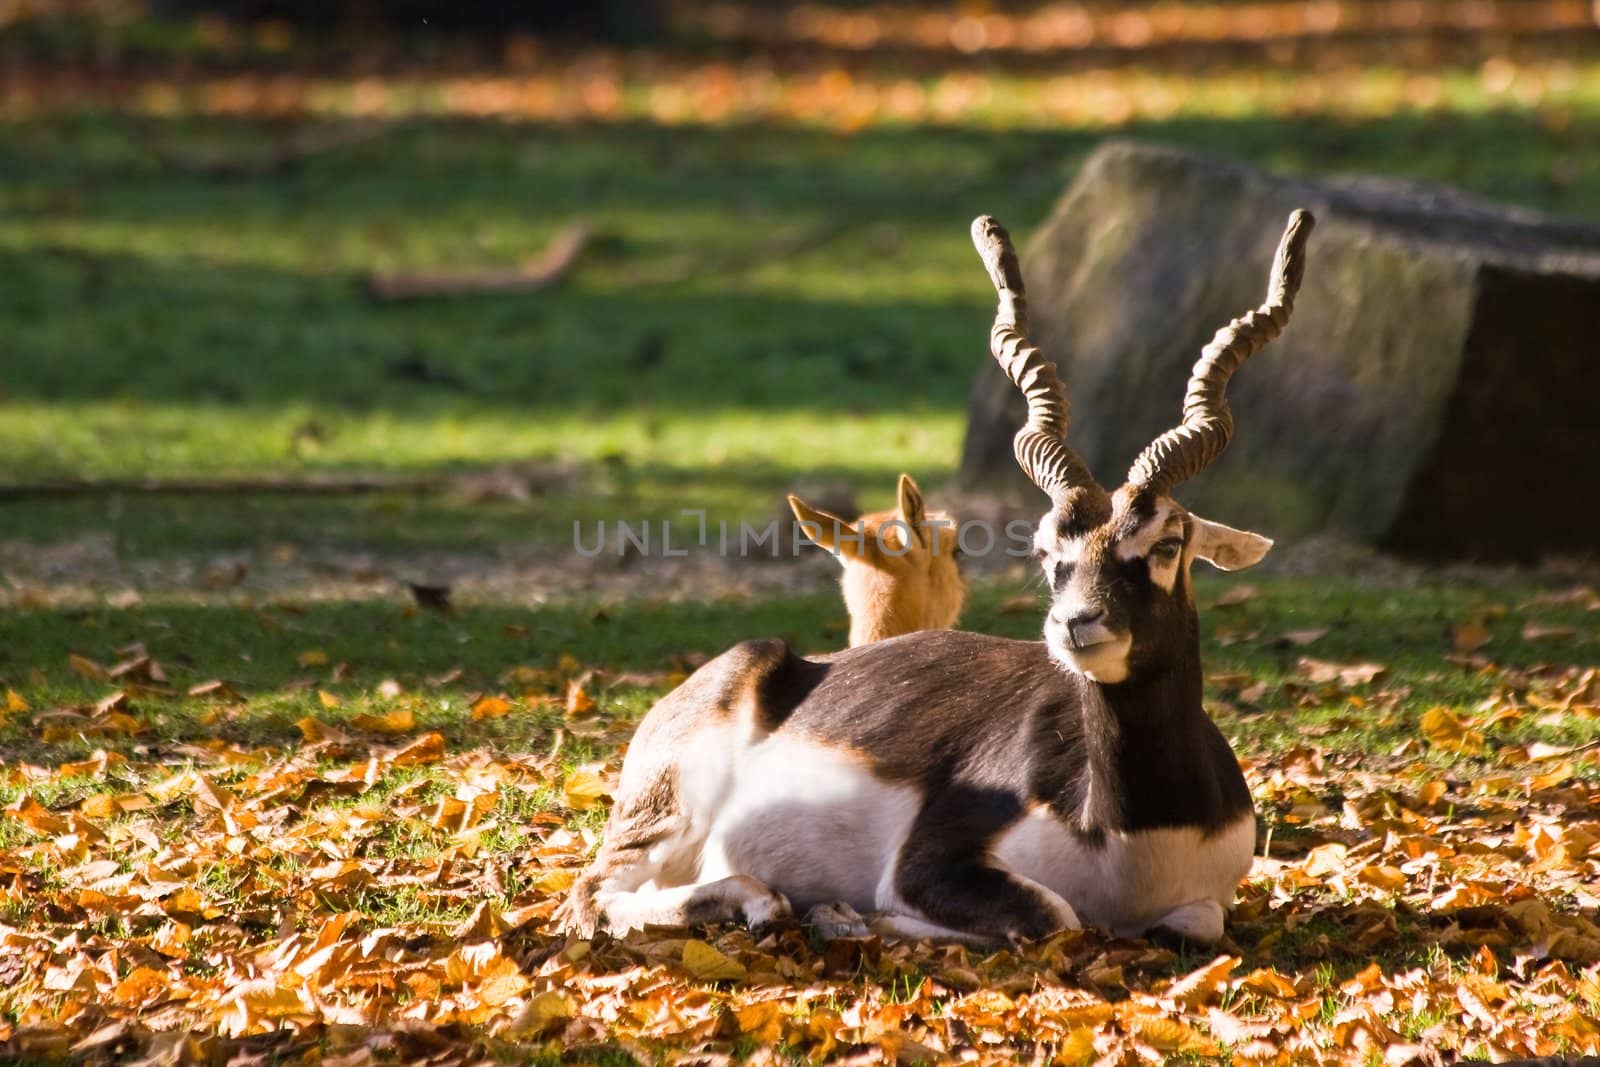 Blackbuck or Indian antilope in autumn, male and female resting